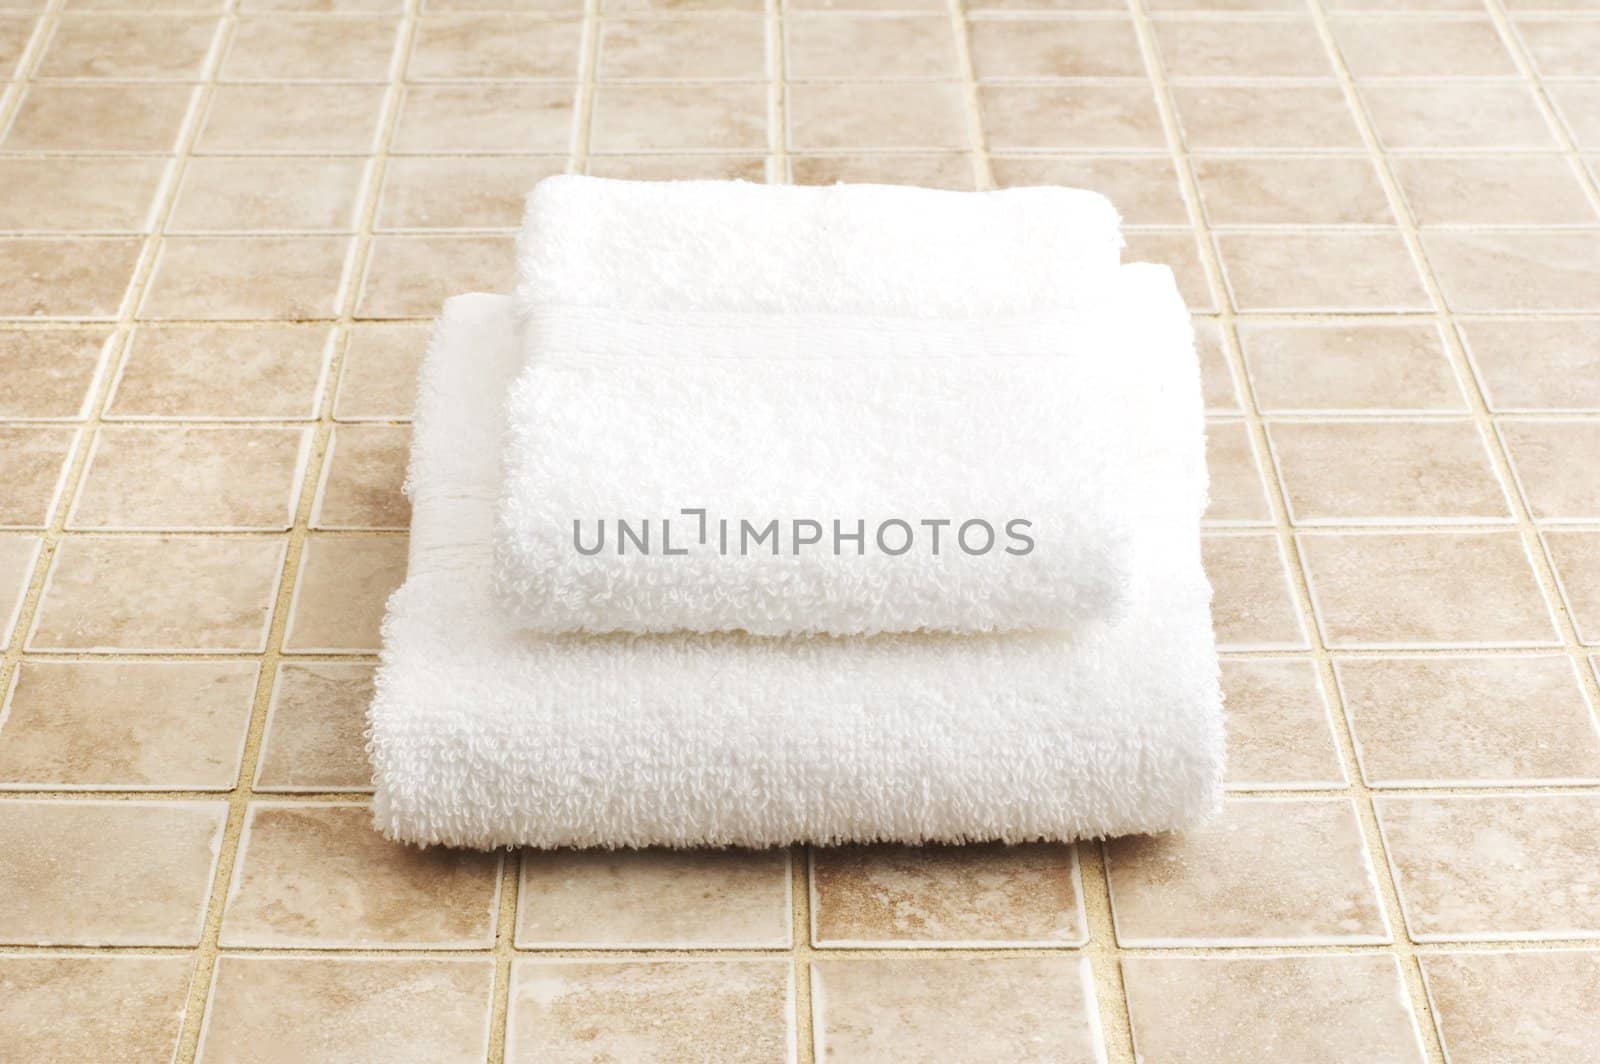 Bathroom object photographed against a stone tile backdrop.